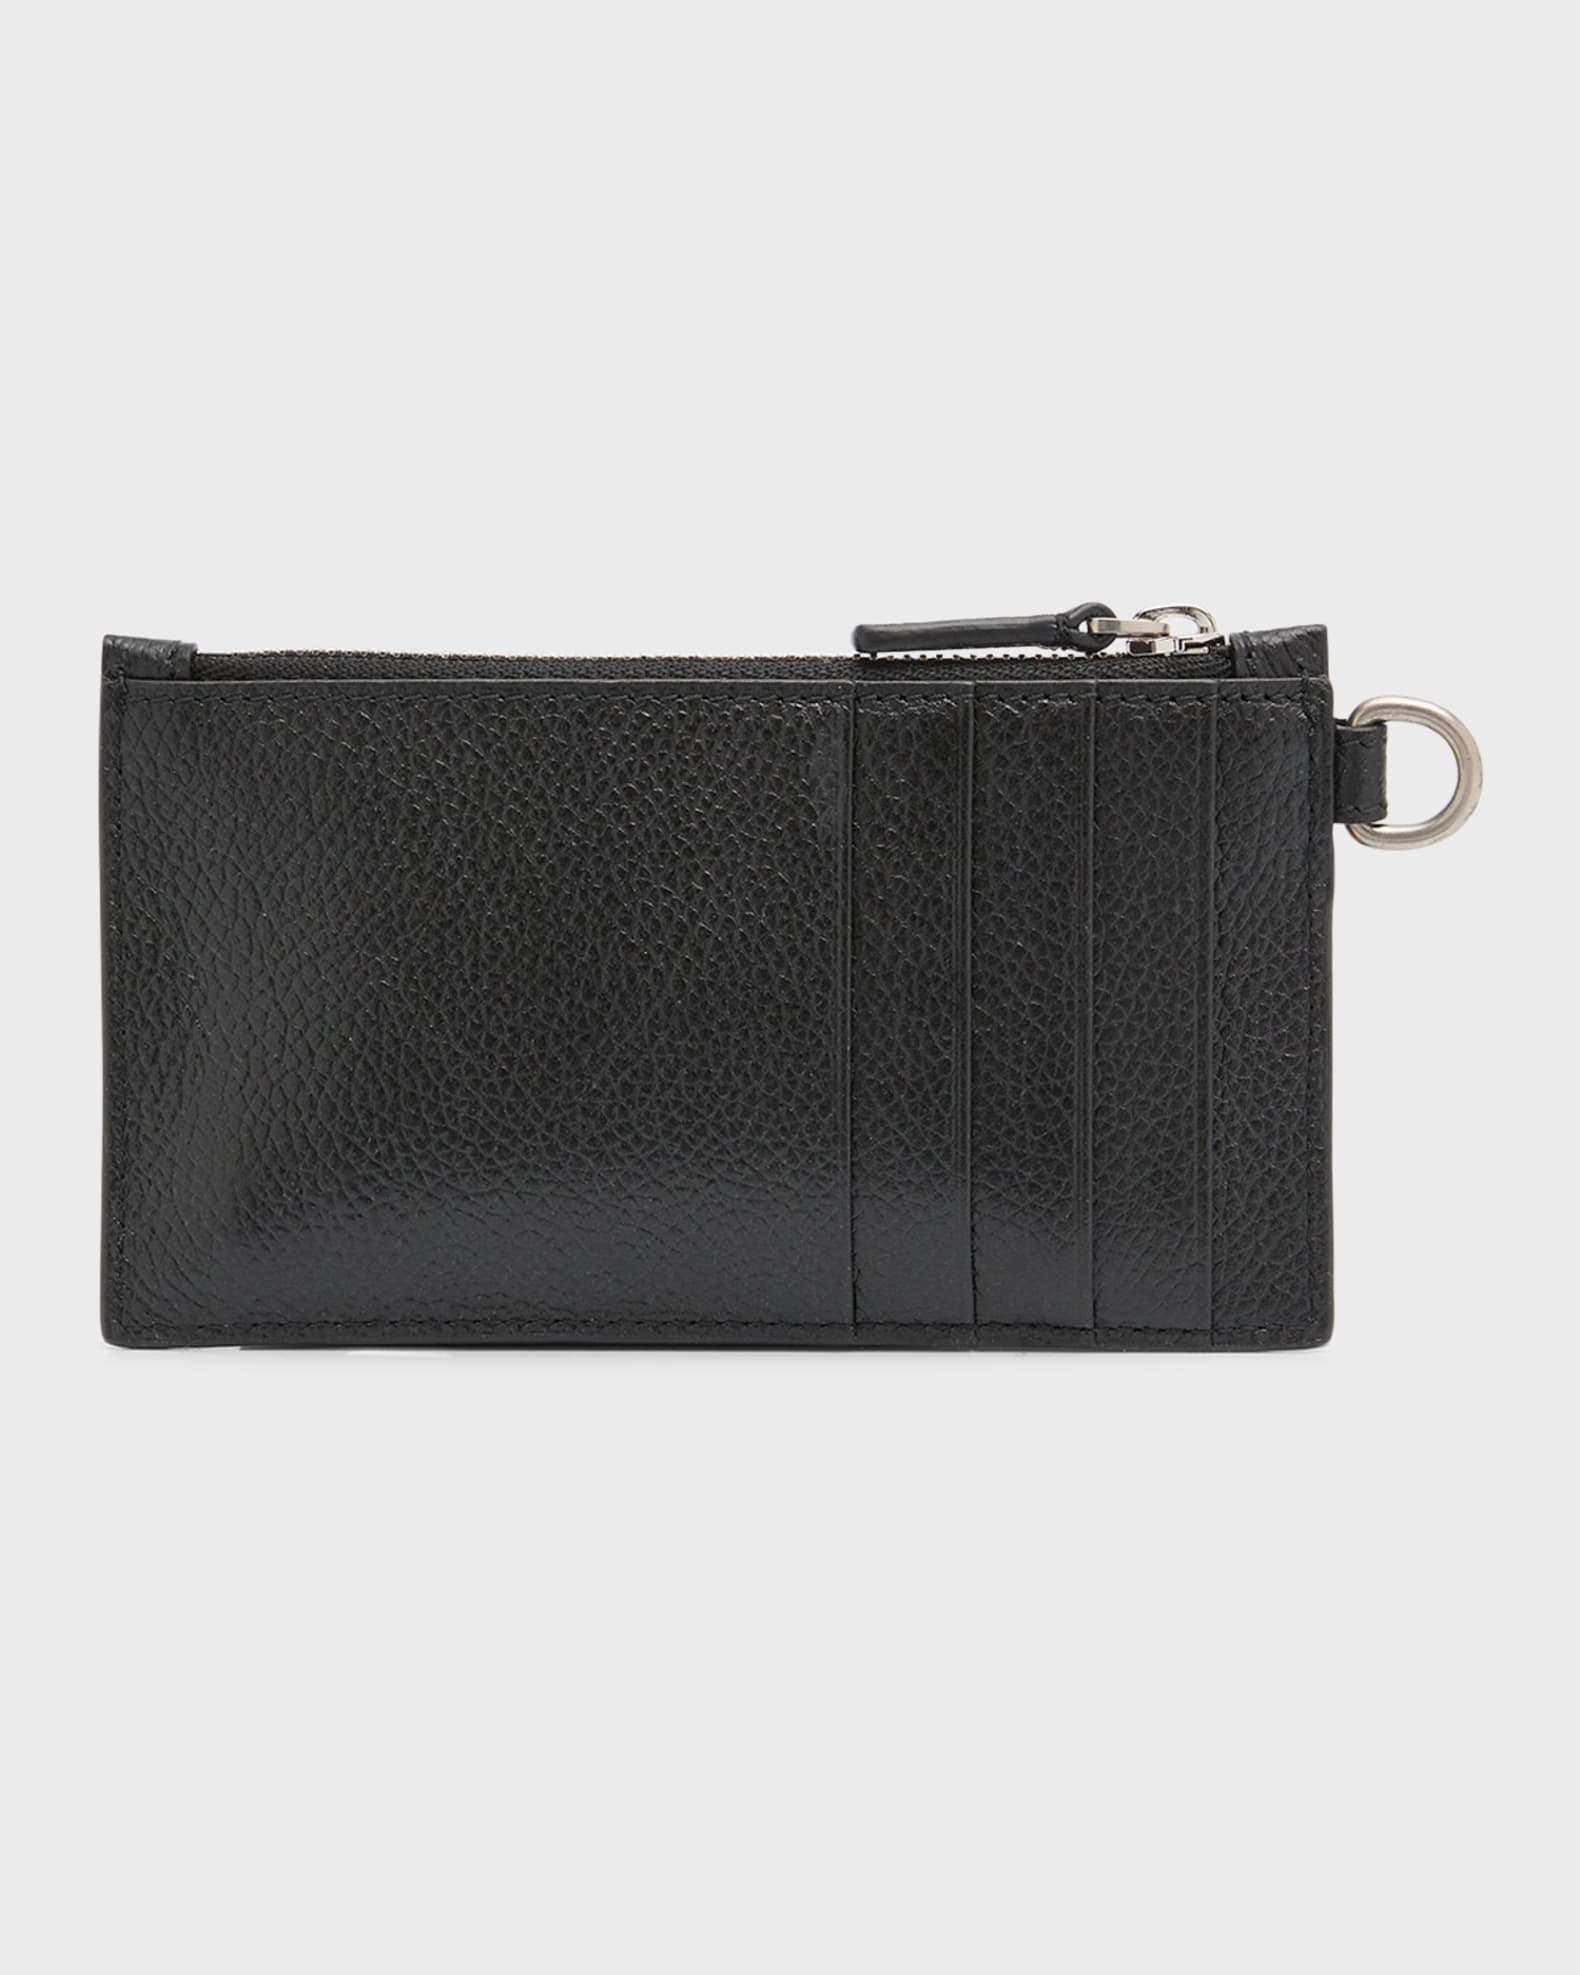 EMPORIO ARMANI Gift box with card holder and key ring in monogram leather